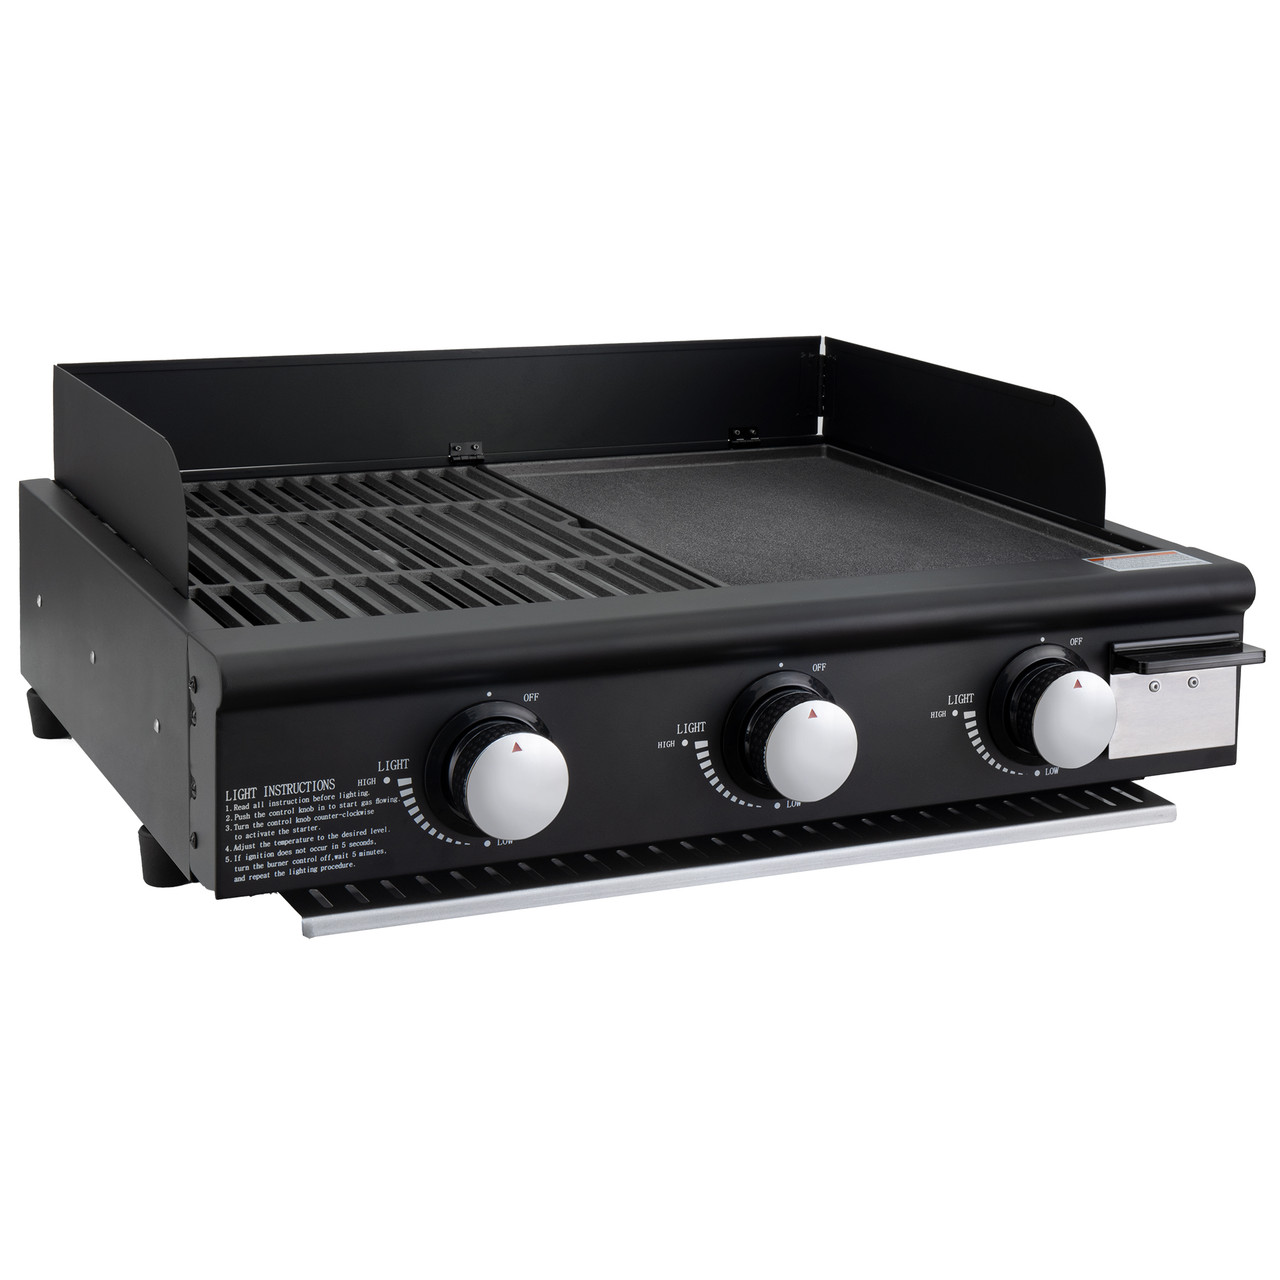 RecPro RV Side-by-Side Griddle and Grill | 3-Burner Propane GAS Cooktop | Flat-Top Grill and Grates | RV Grill